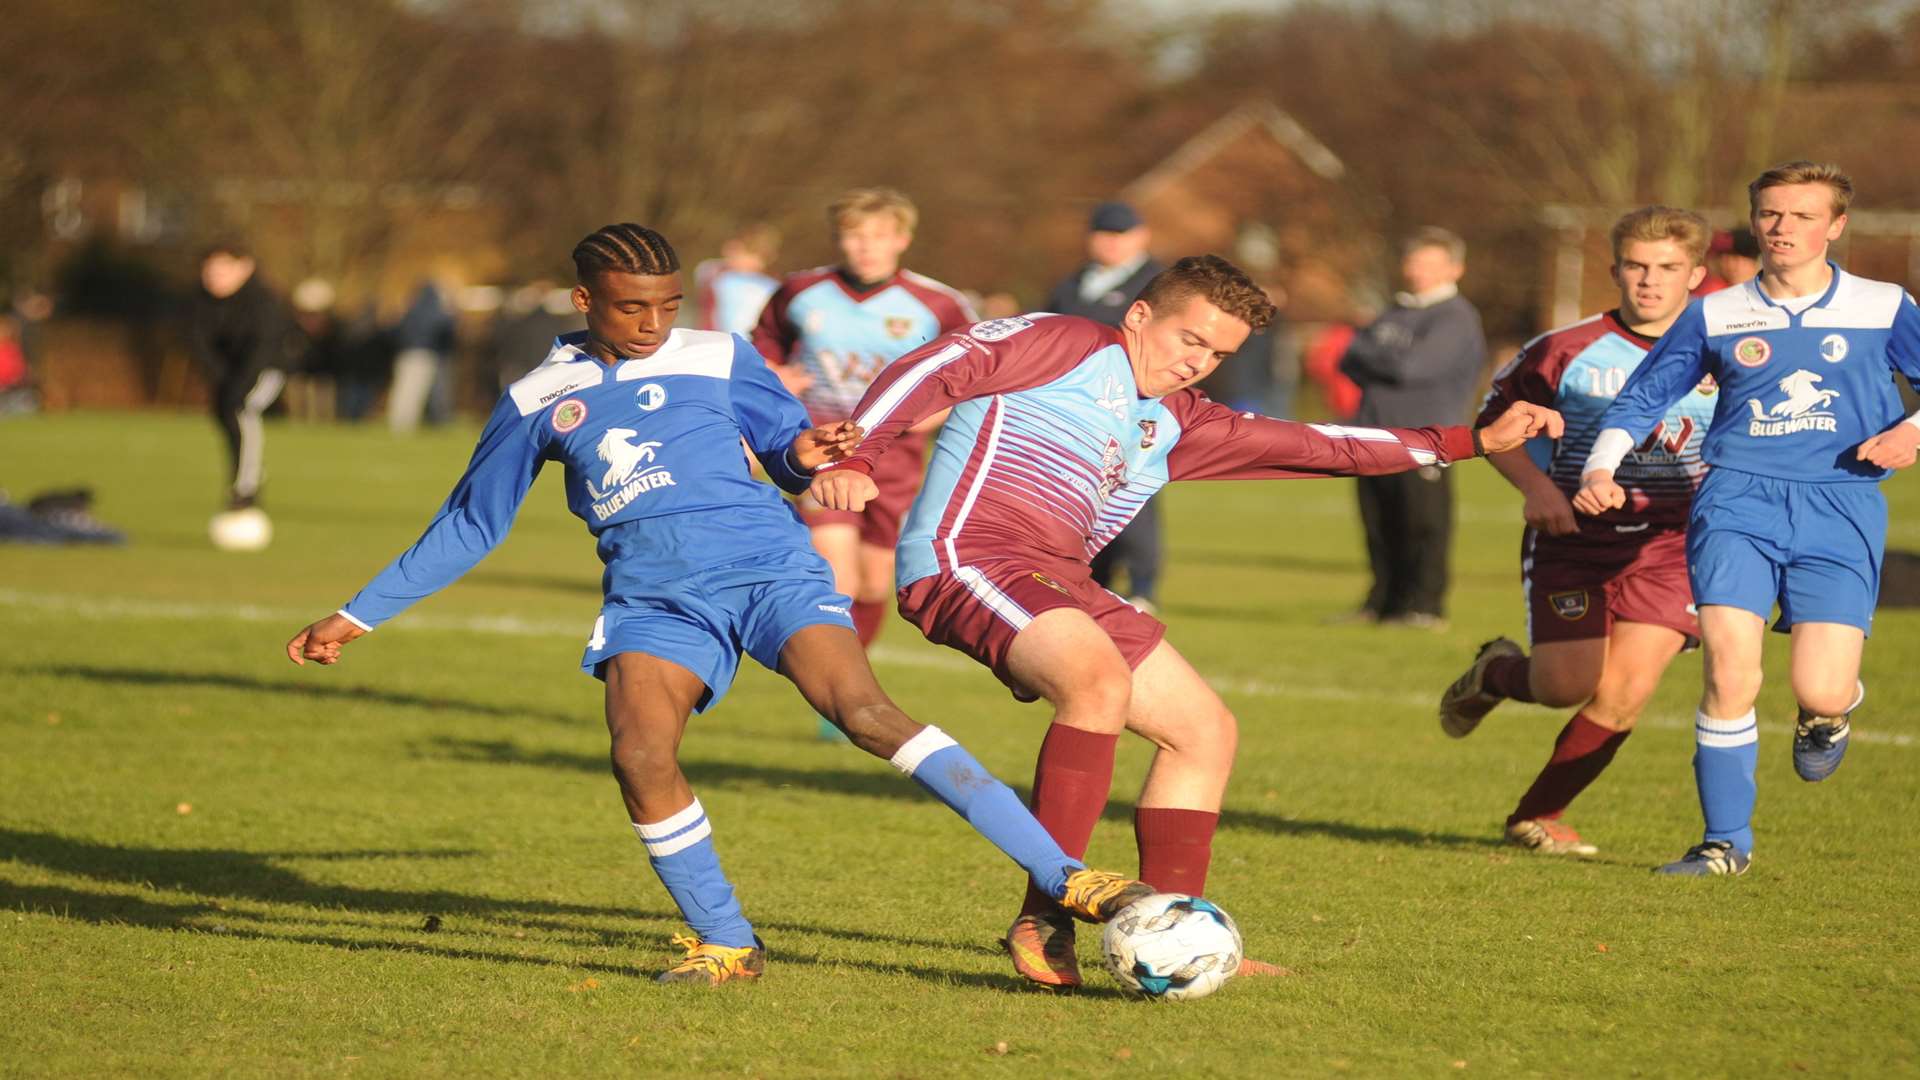 KFU Woodpecker and Wigmore Youth Wanderers go head-to-head in Under-18 Division 2 Picture: Steve Crispe